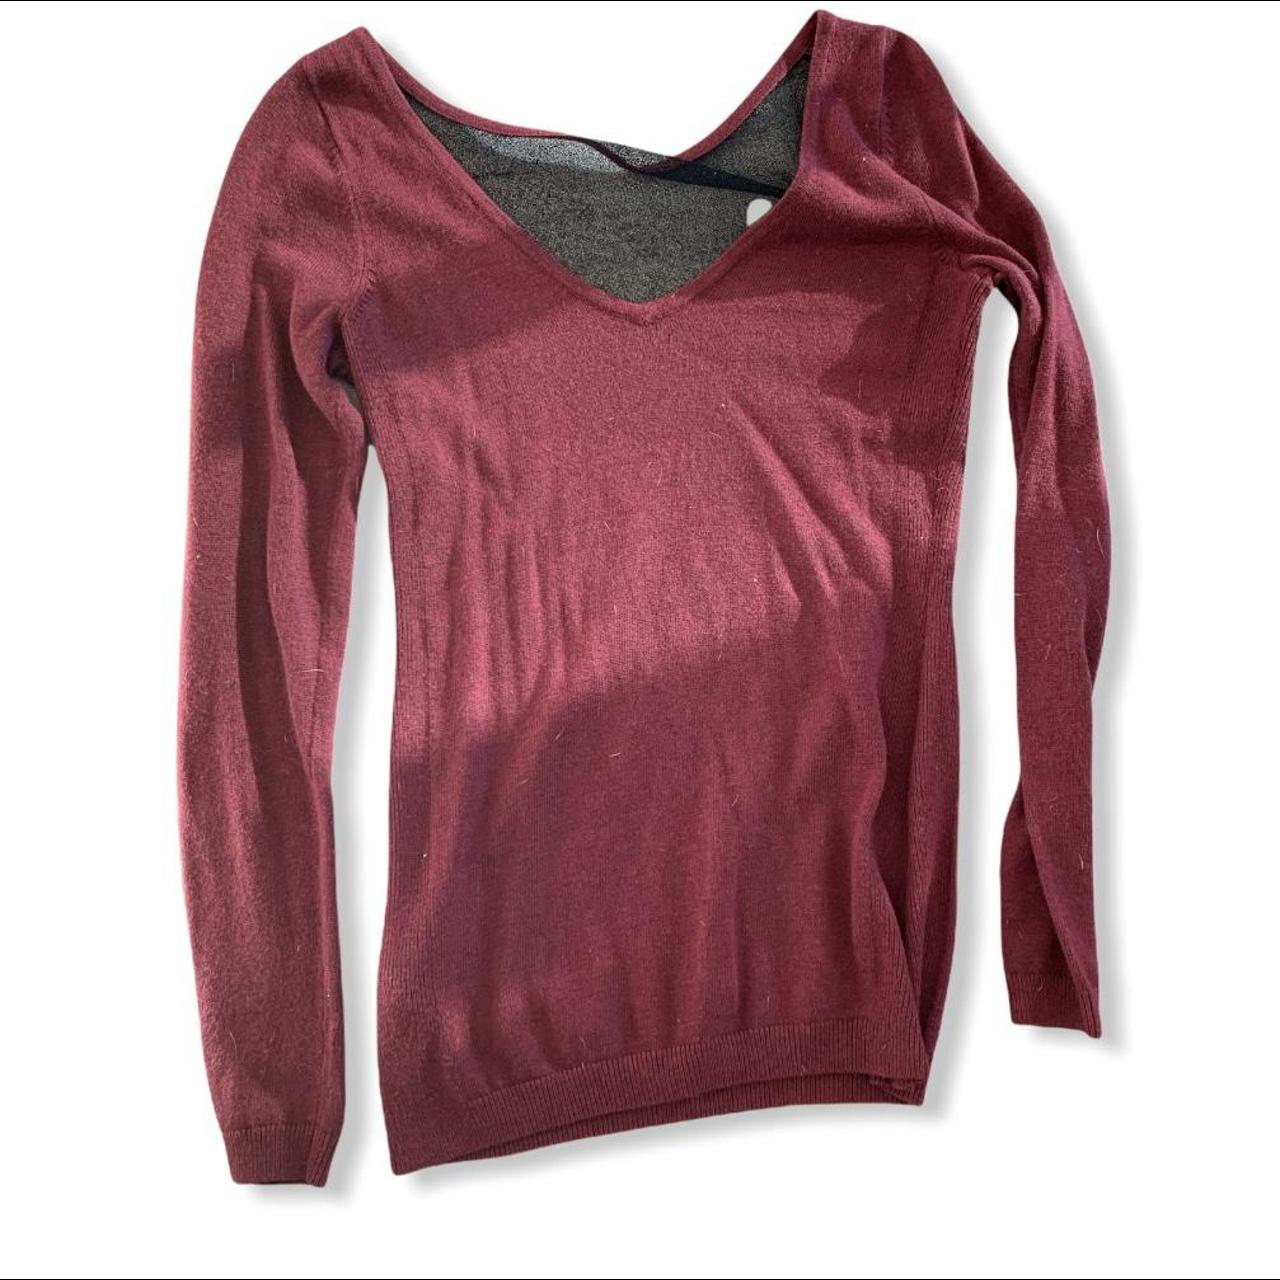 Product Image 2 - Vintage maroon mesh guess women’s